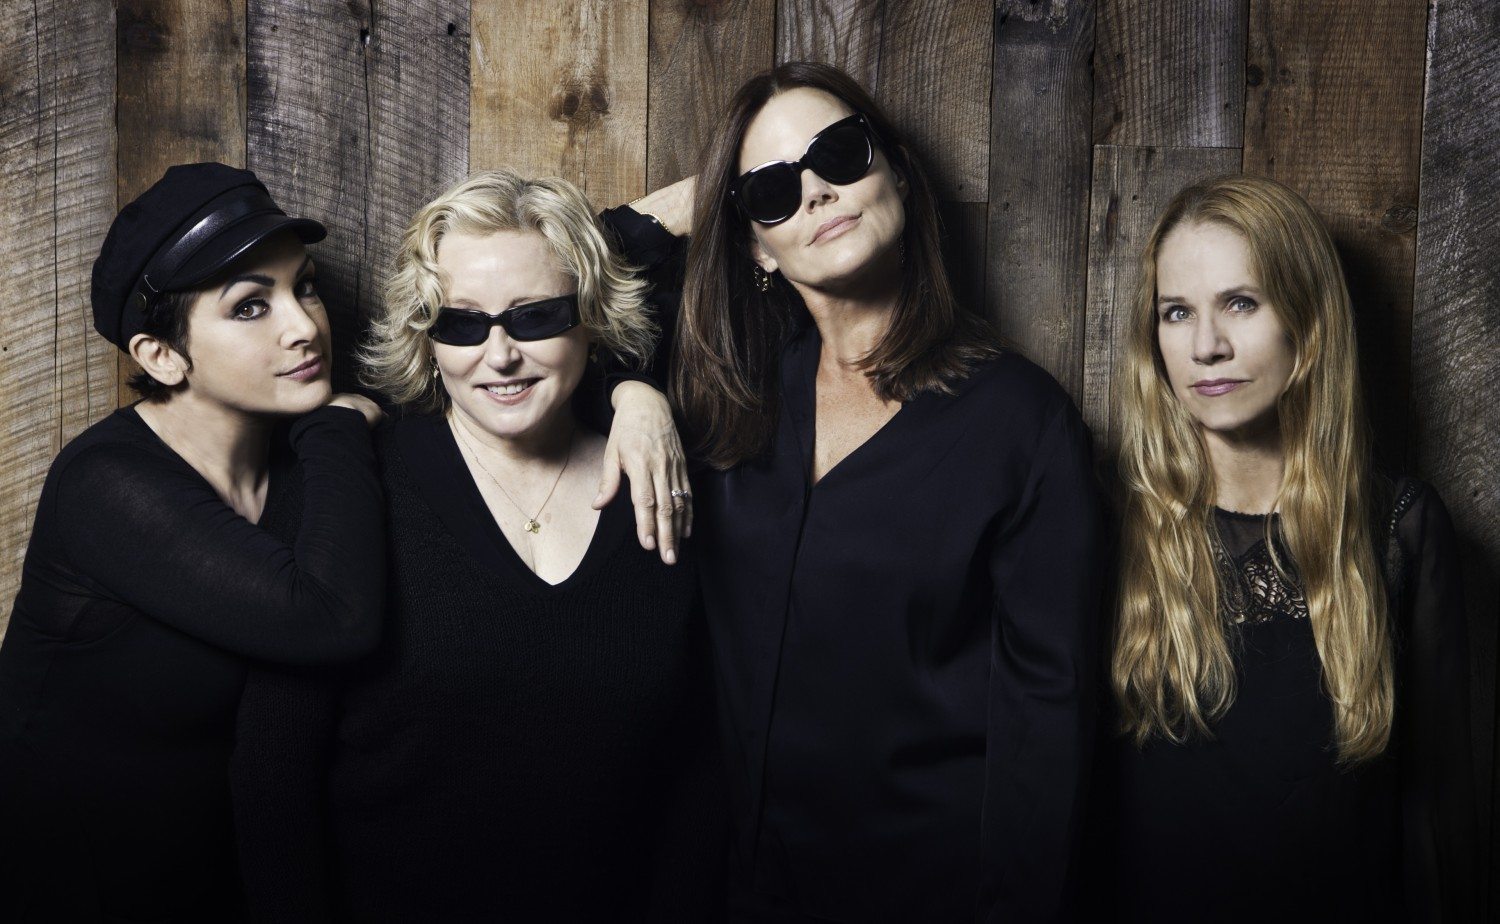 Guitarist Charlotte Caffey on the farewell tour of The Go-Go’s, Aug. 13 at Central Park, Green Day, Best Coast and more